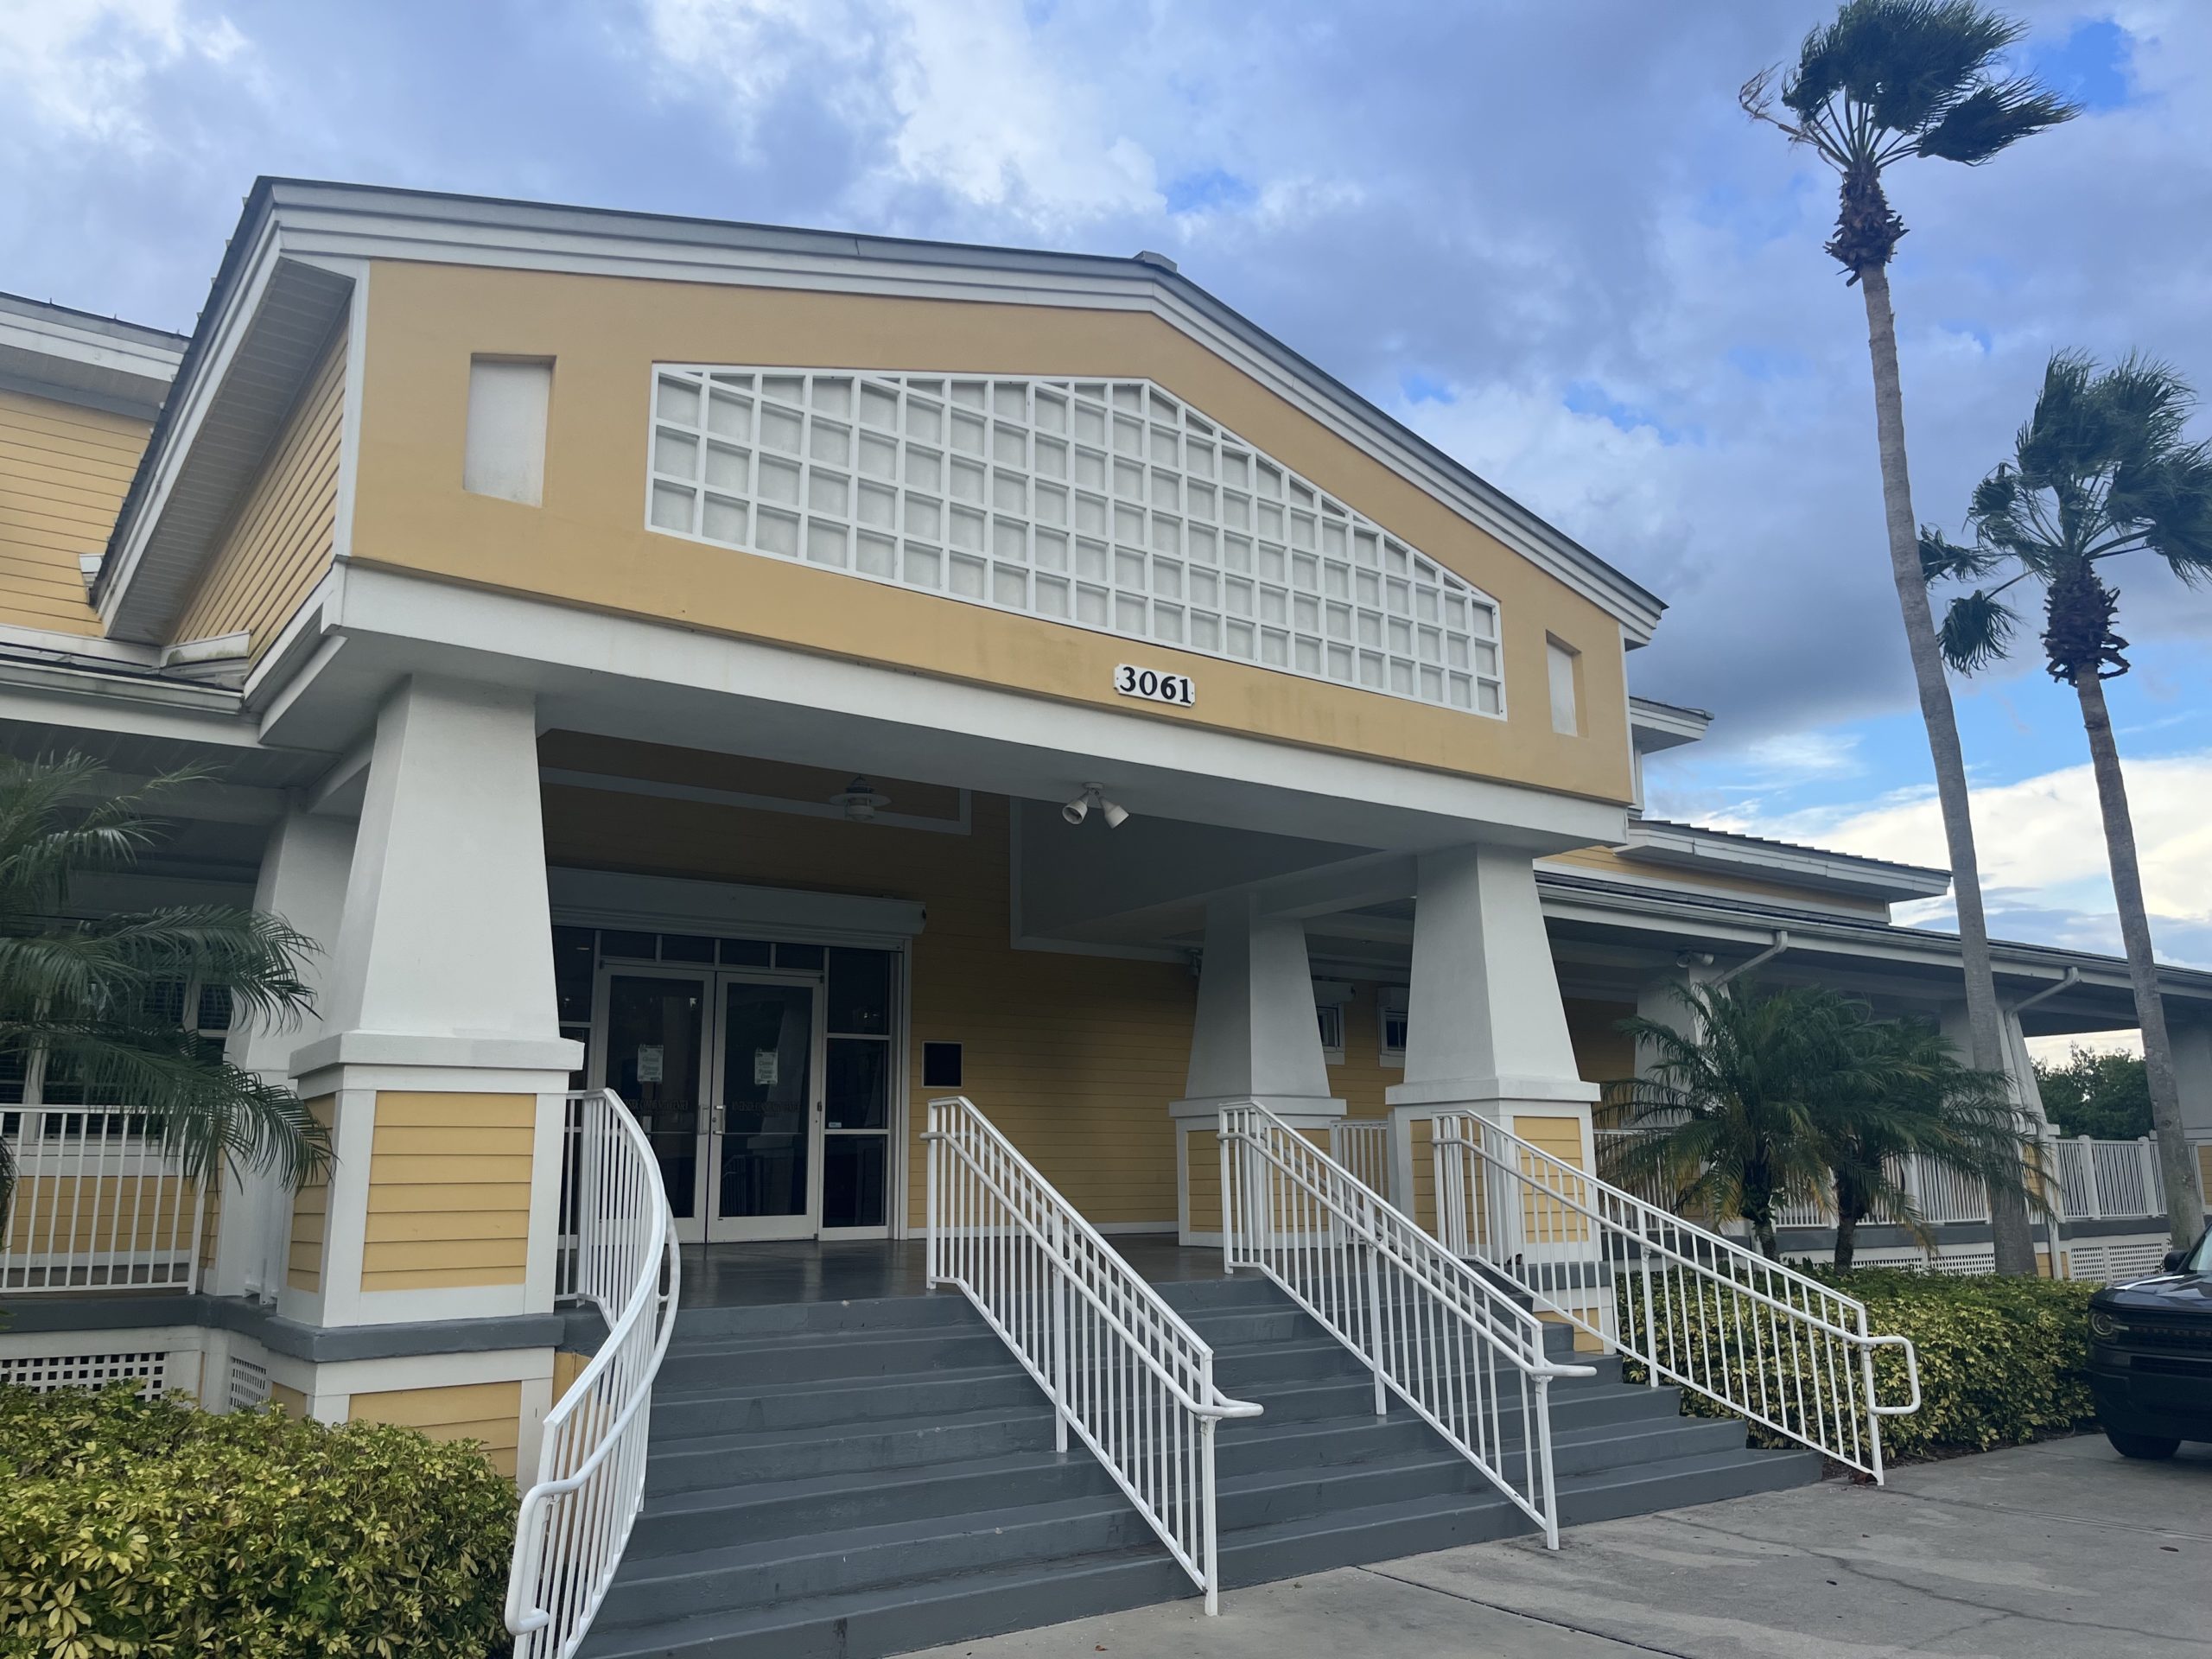 Community Center in East Fort Myers